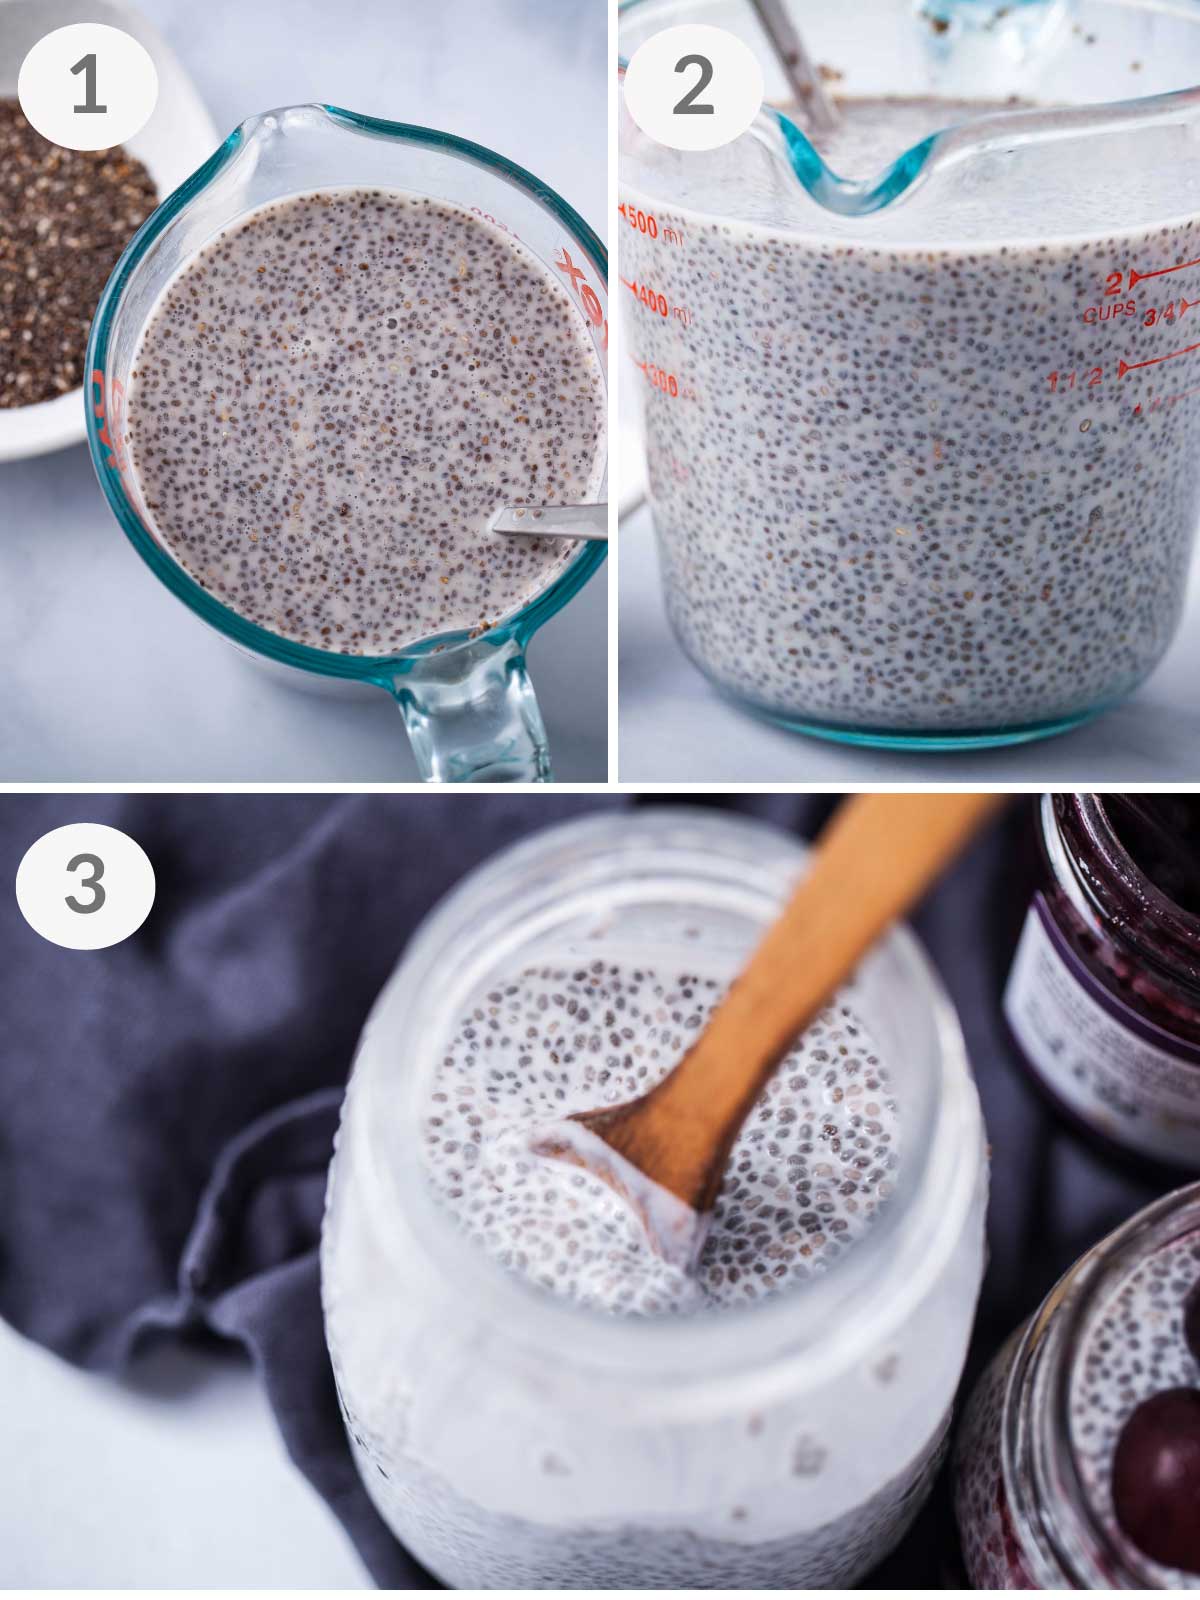 A series of steps showing how to make chia seed pudding.